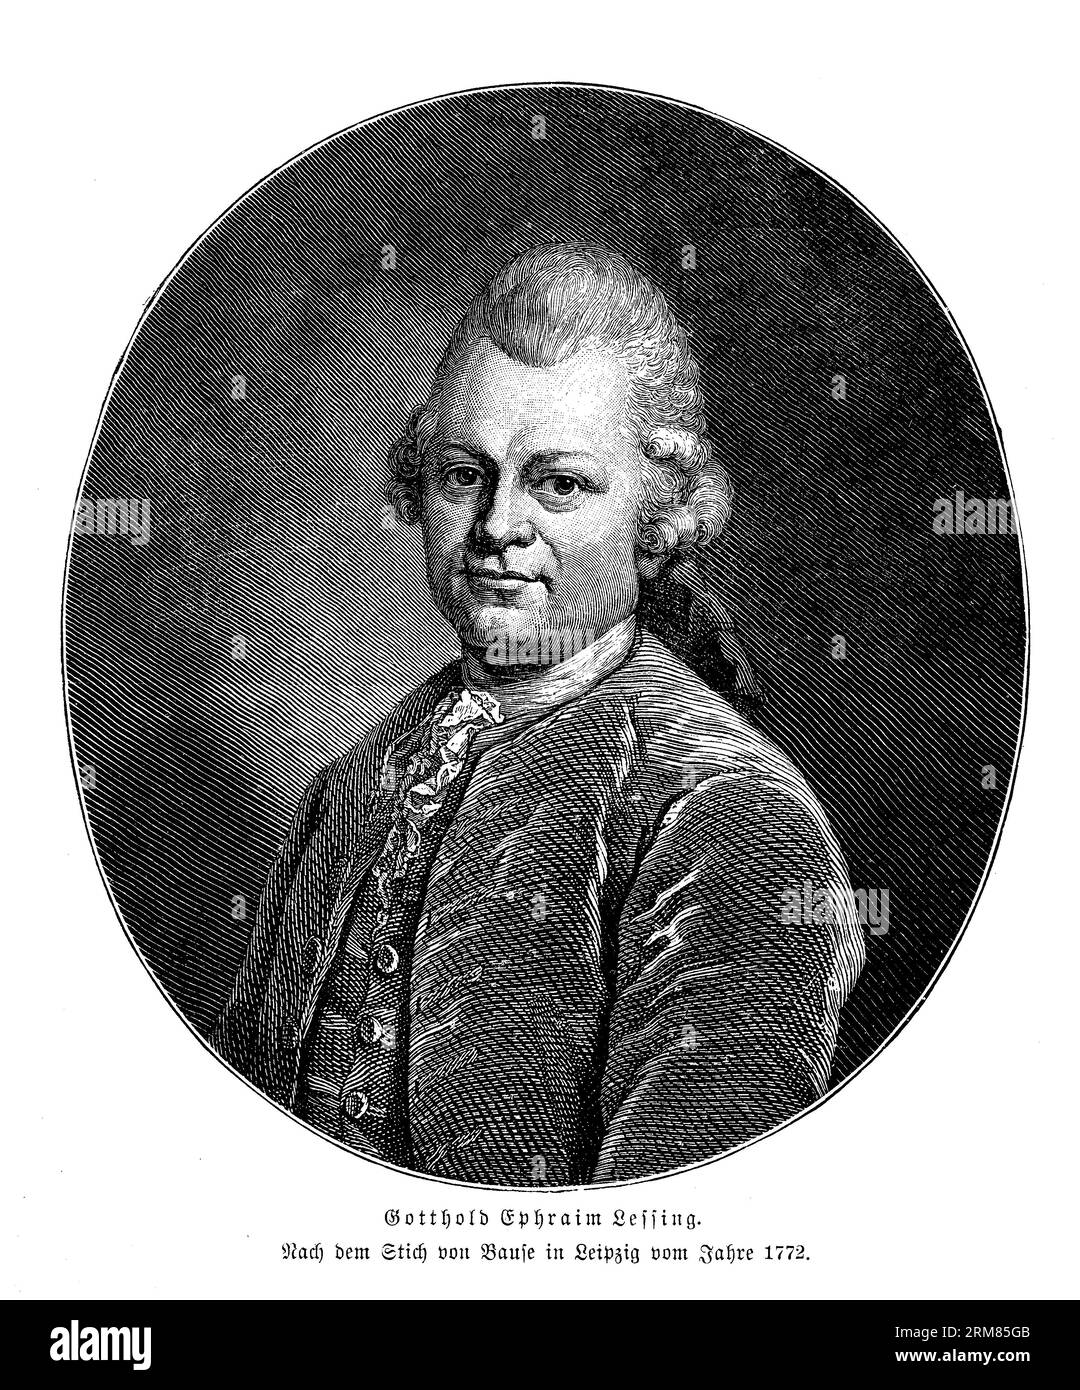 Gotthold Ephraim Lessing, born on January 22, 1729, was a prominent German writer, philosopher, and playwright during the Enlightenment period. He is considered one of the most important figures in German literature and is often referred to as the 'father of German literature.' Stock Photo